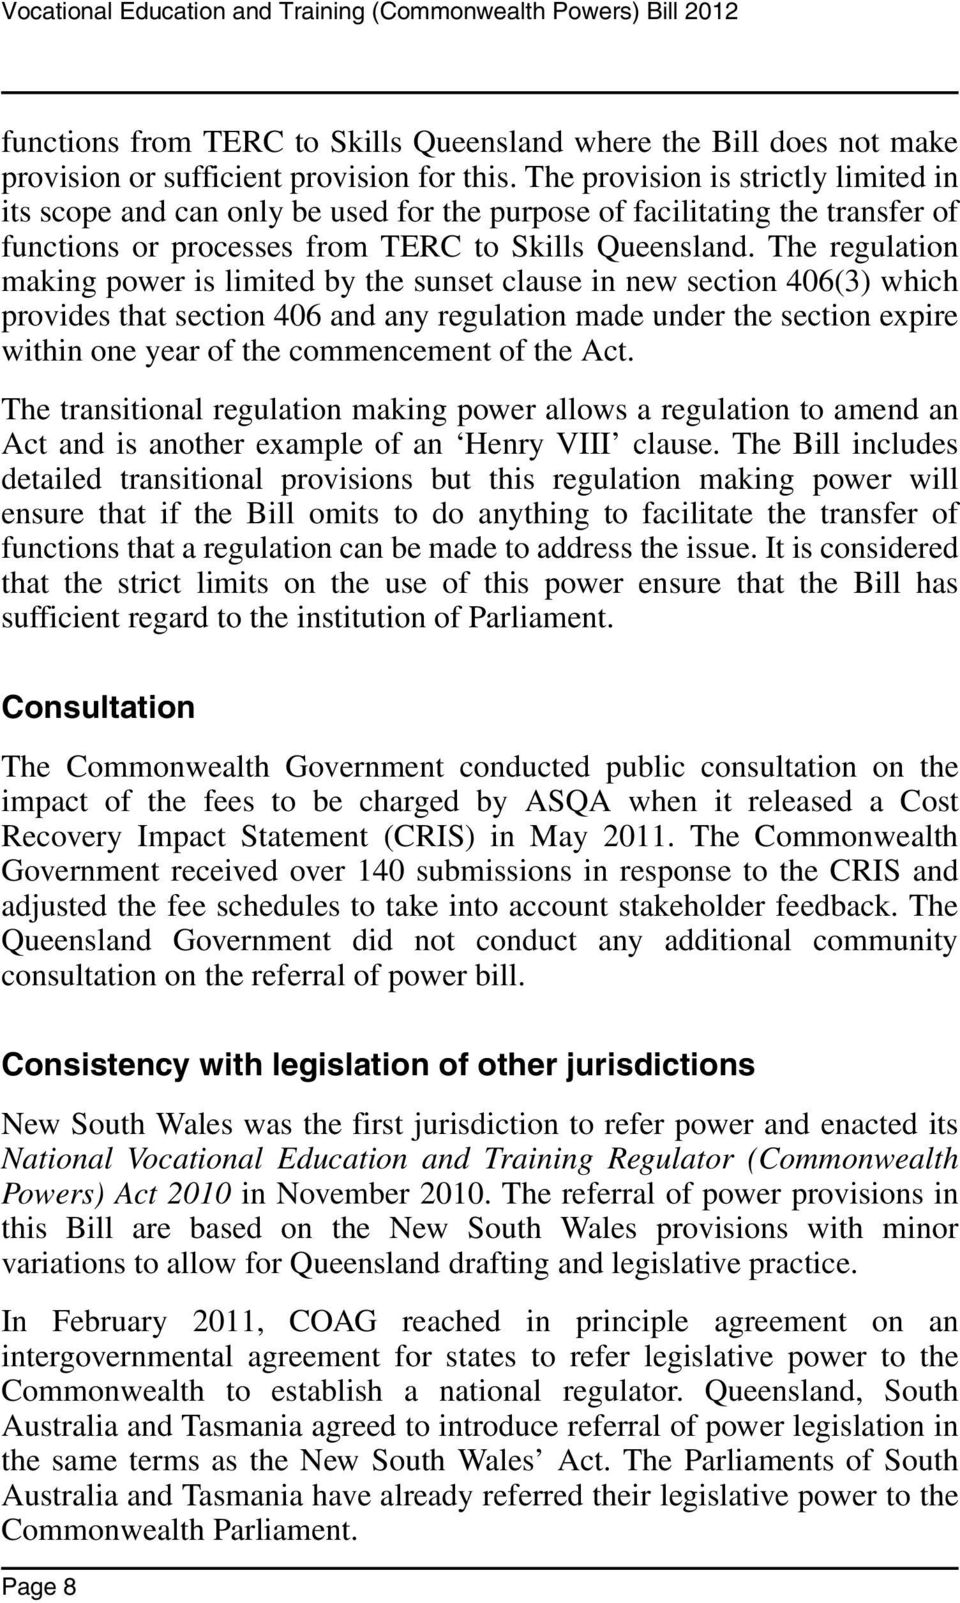 The regulation making power is limited by the sunset clause in new section 406(3) which provides that section 406 and any regulation made under the section expire within one year of the commencement